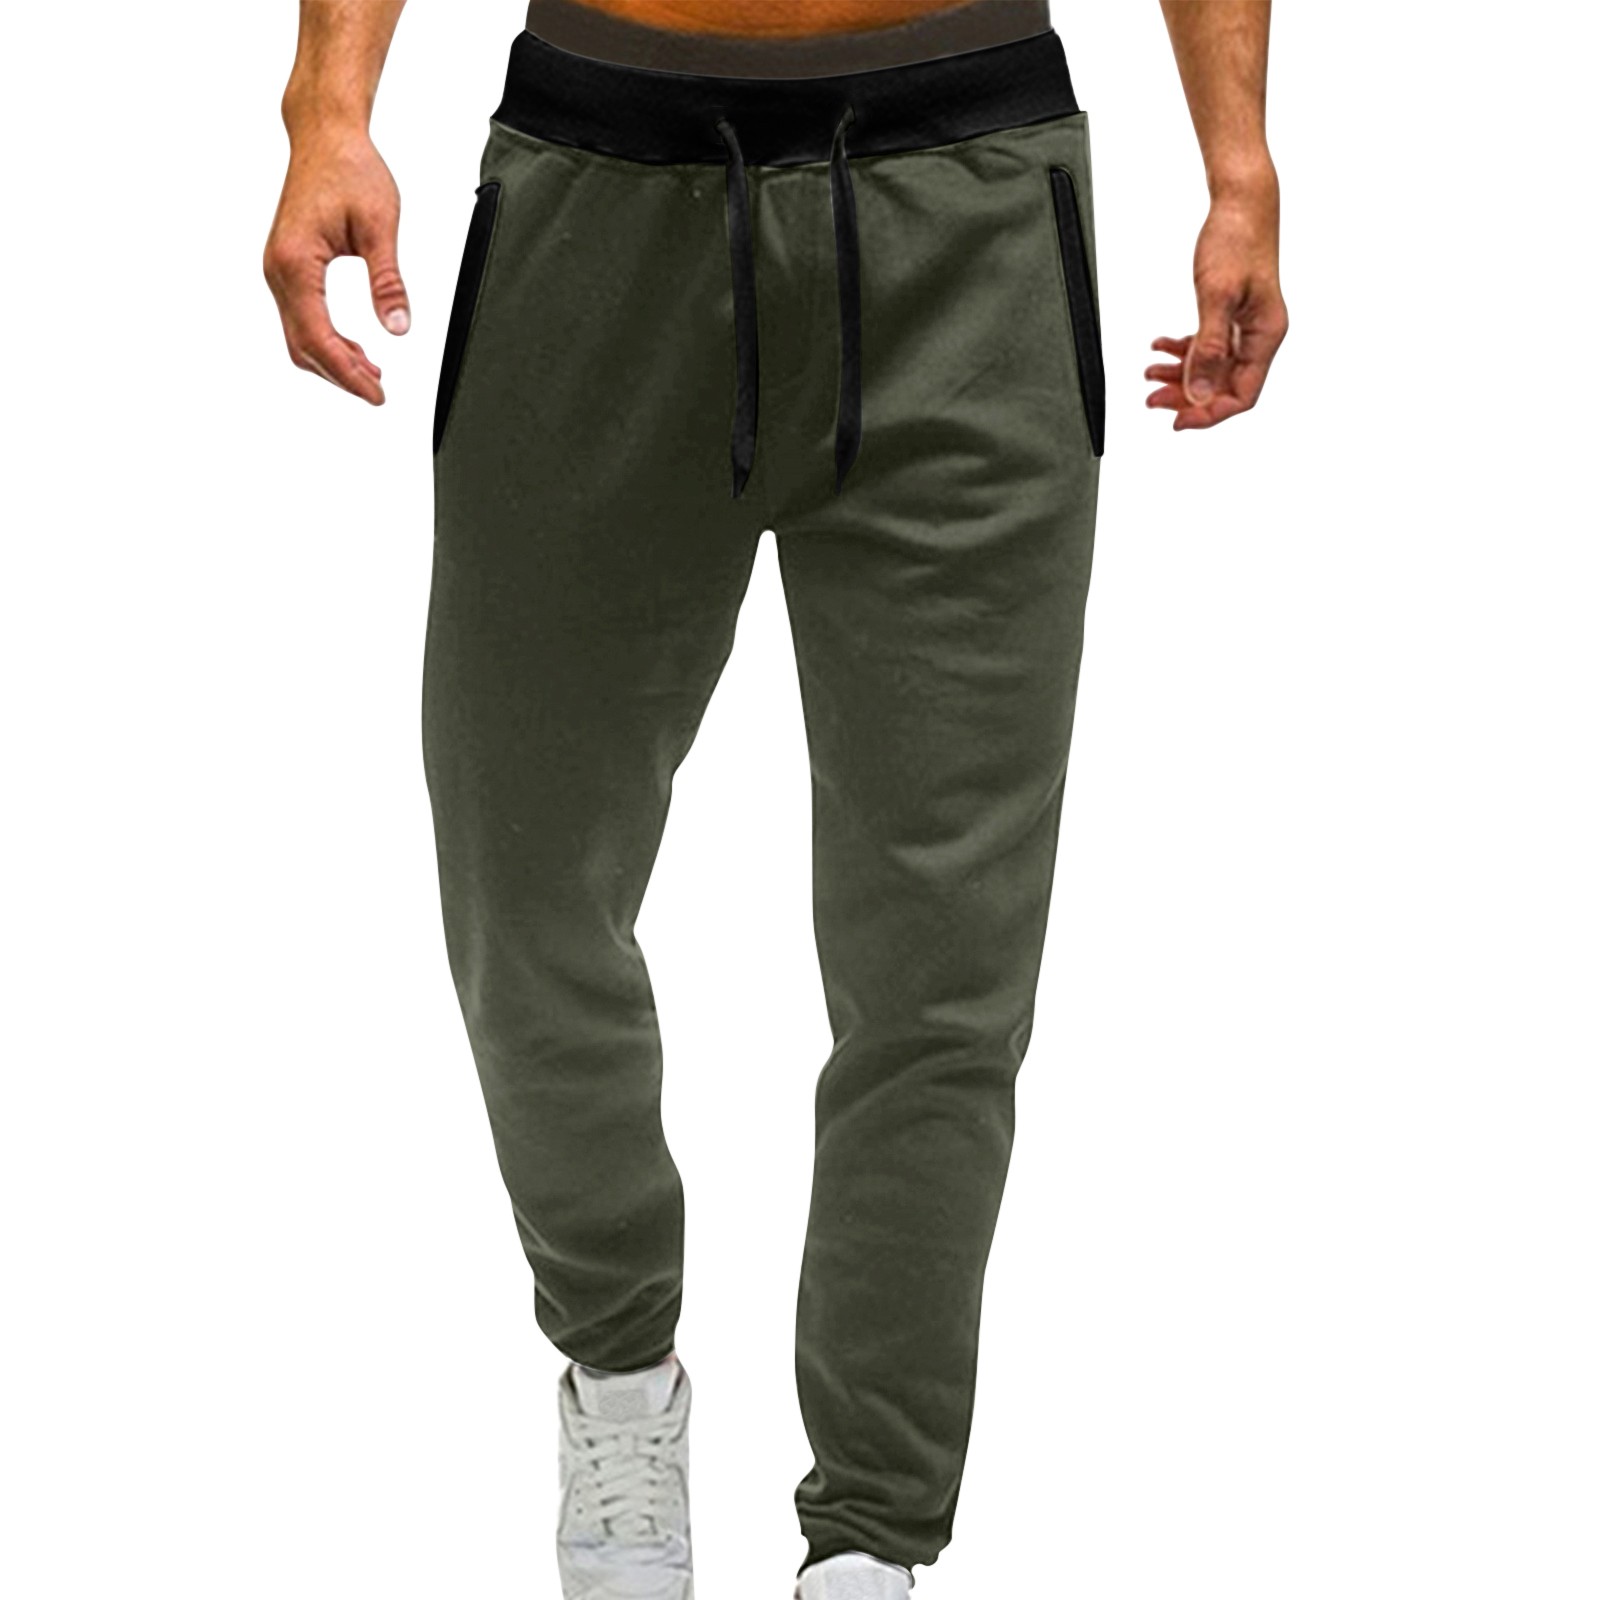 Men's Mid Waisted Pants Casual Jogging Sports Elastic With Pockets ...